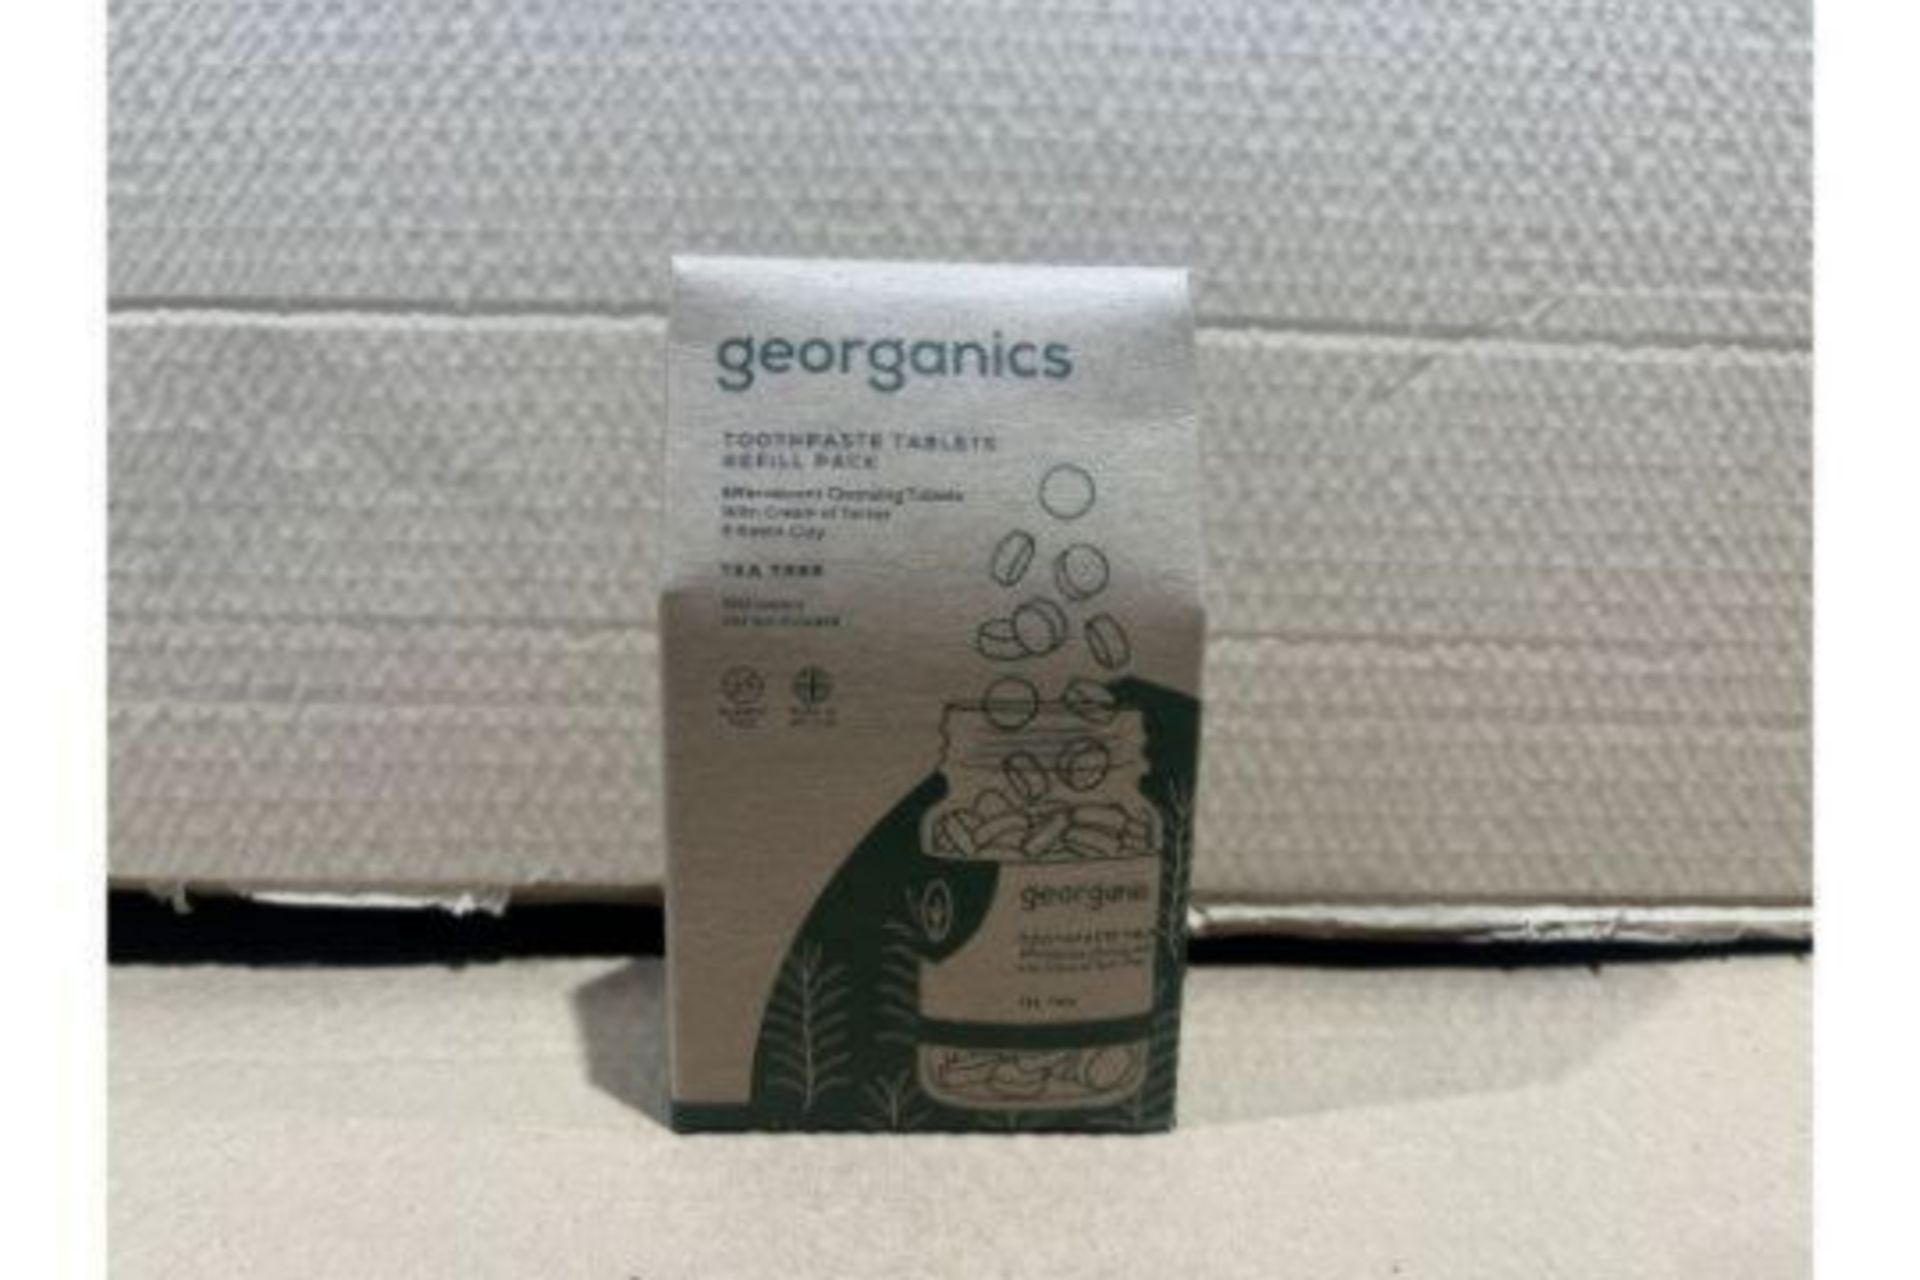 50 X BRAND NEW GEORGANICS PACKS OF 720 TOOTHPASTE TABLETS REFILL PACKS RRP £26 EACH S2